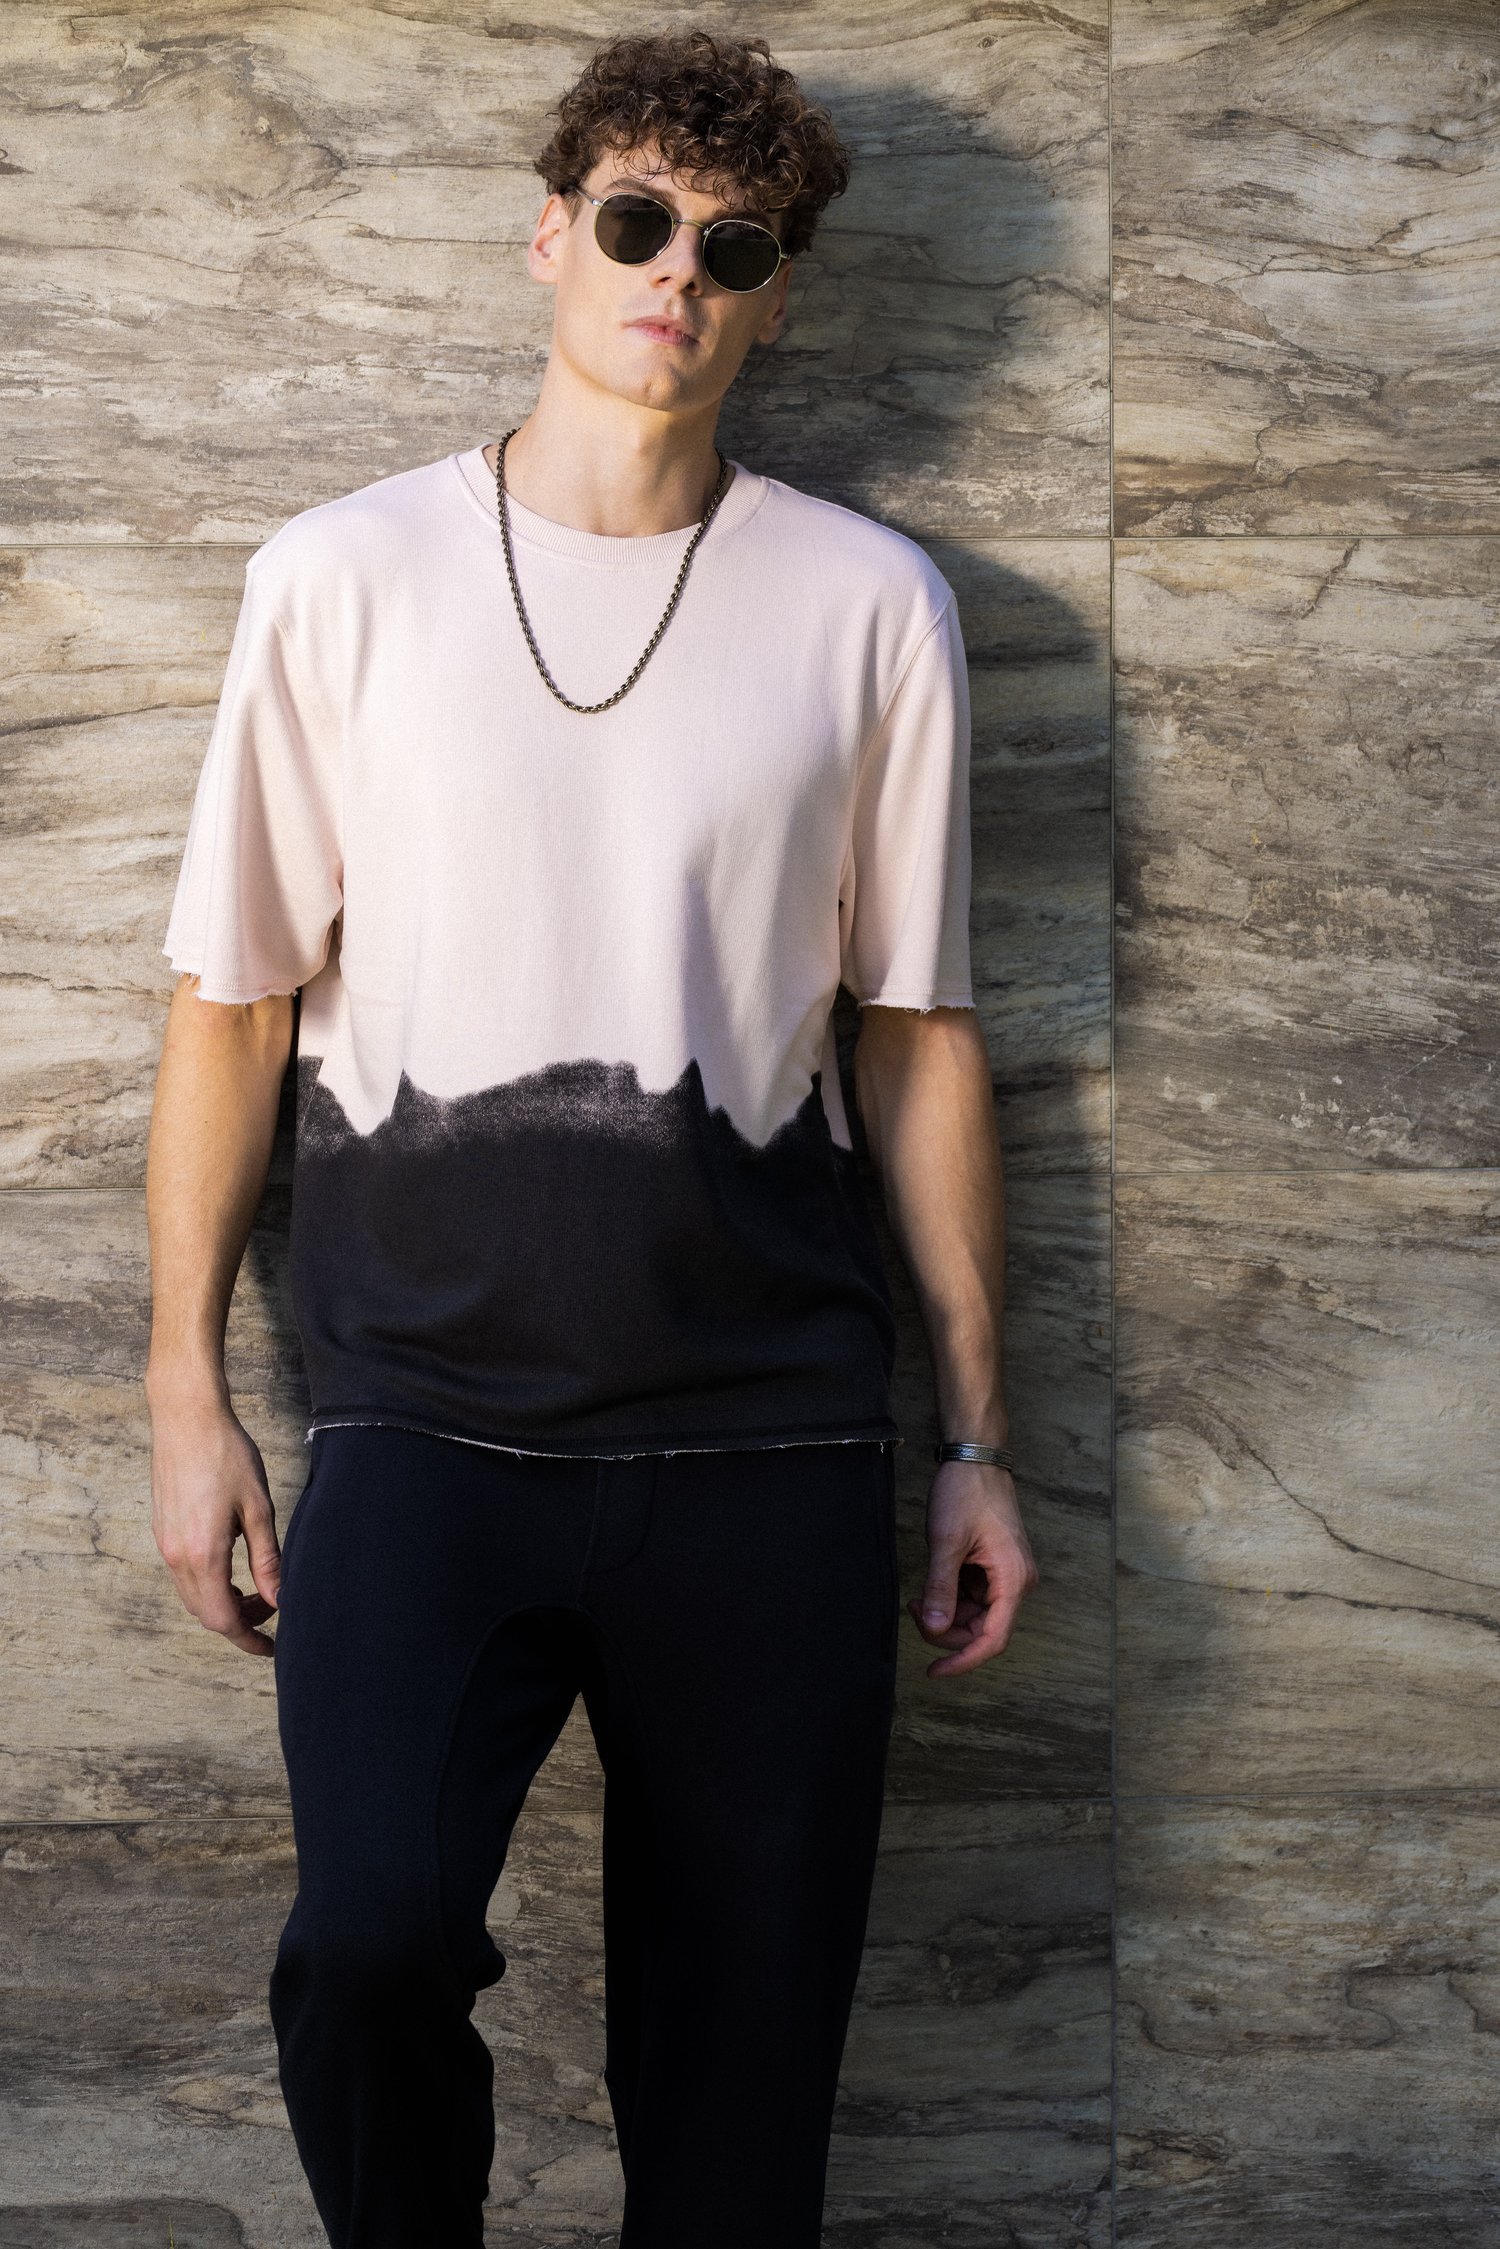 ombre fashion urban cool male model necklace shirt summer vibe hong kong photography production.jpg